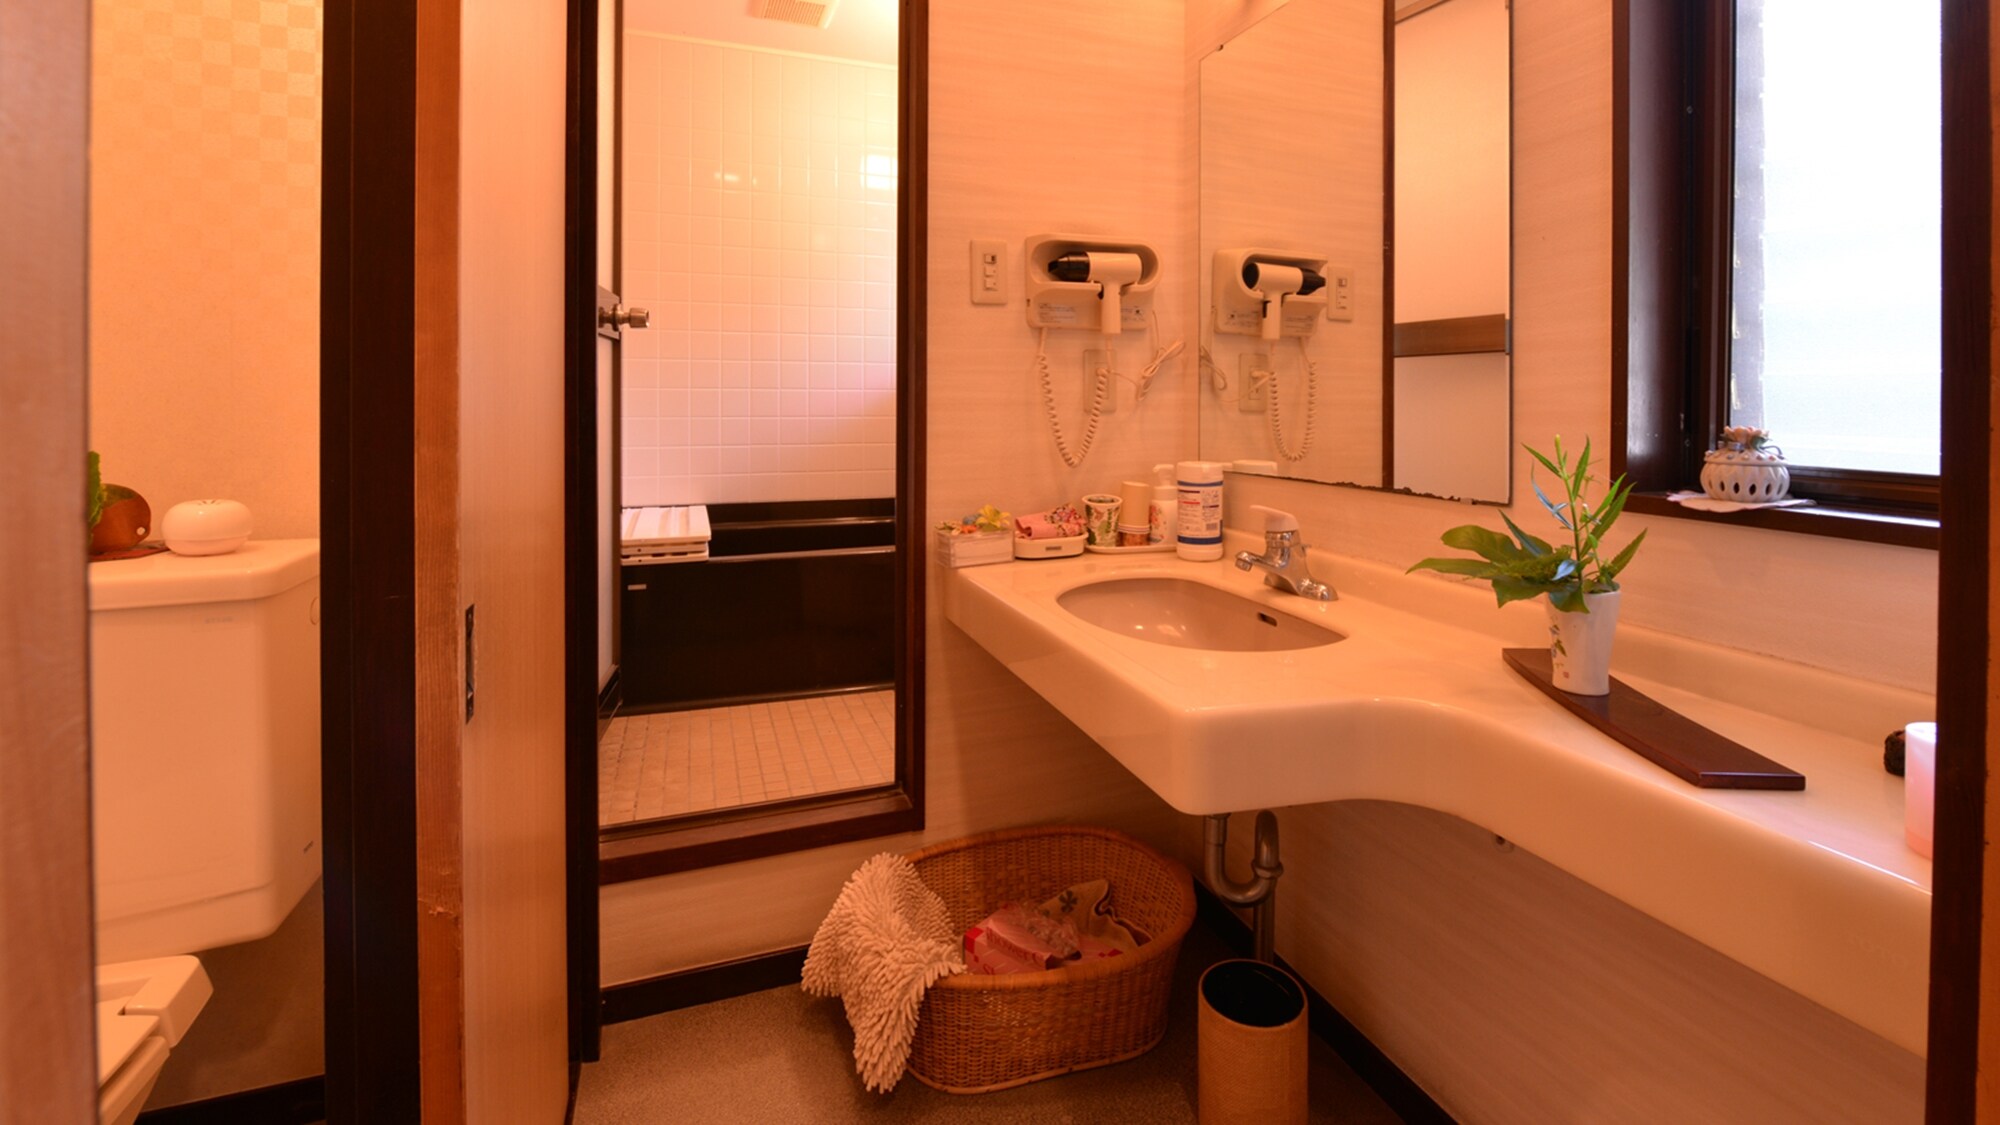 * Japanese-style room (example of guest room) / Washing space with cleanliness in mind.